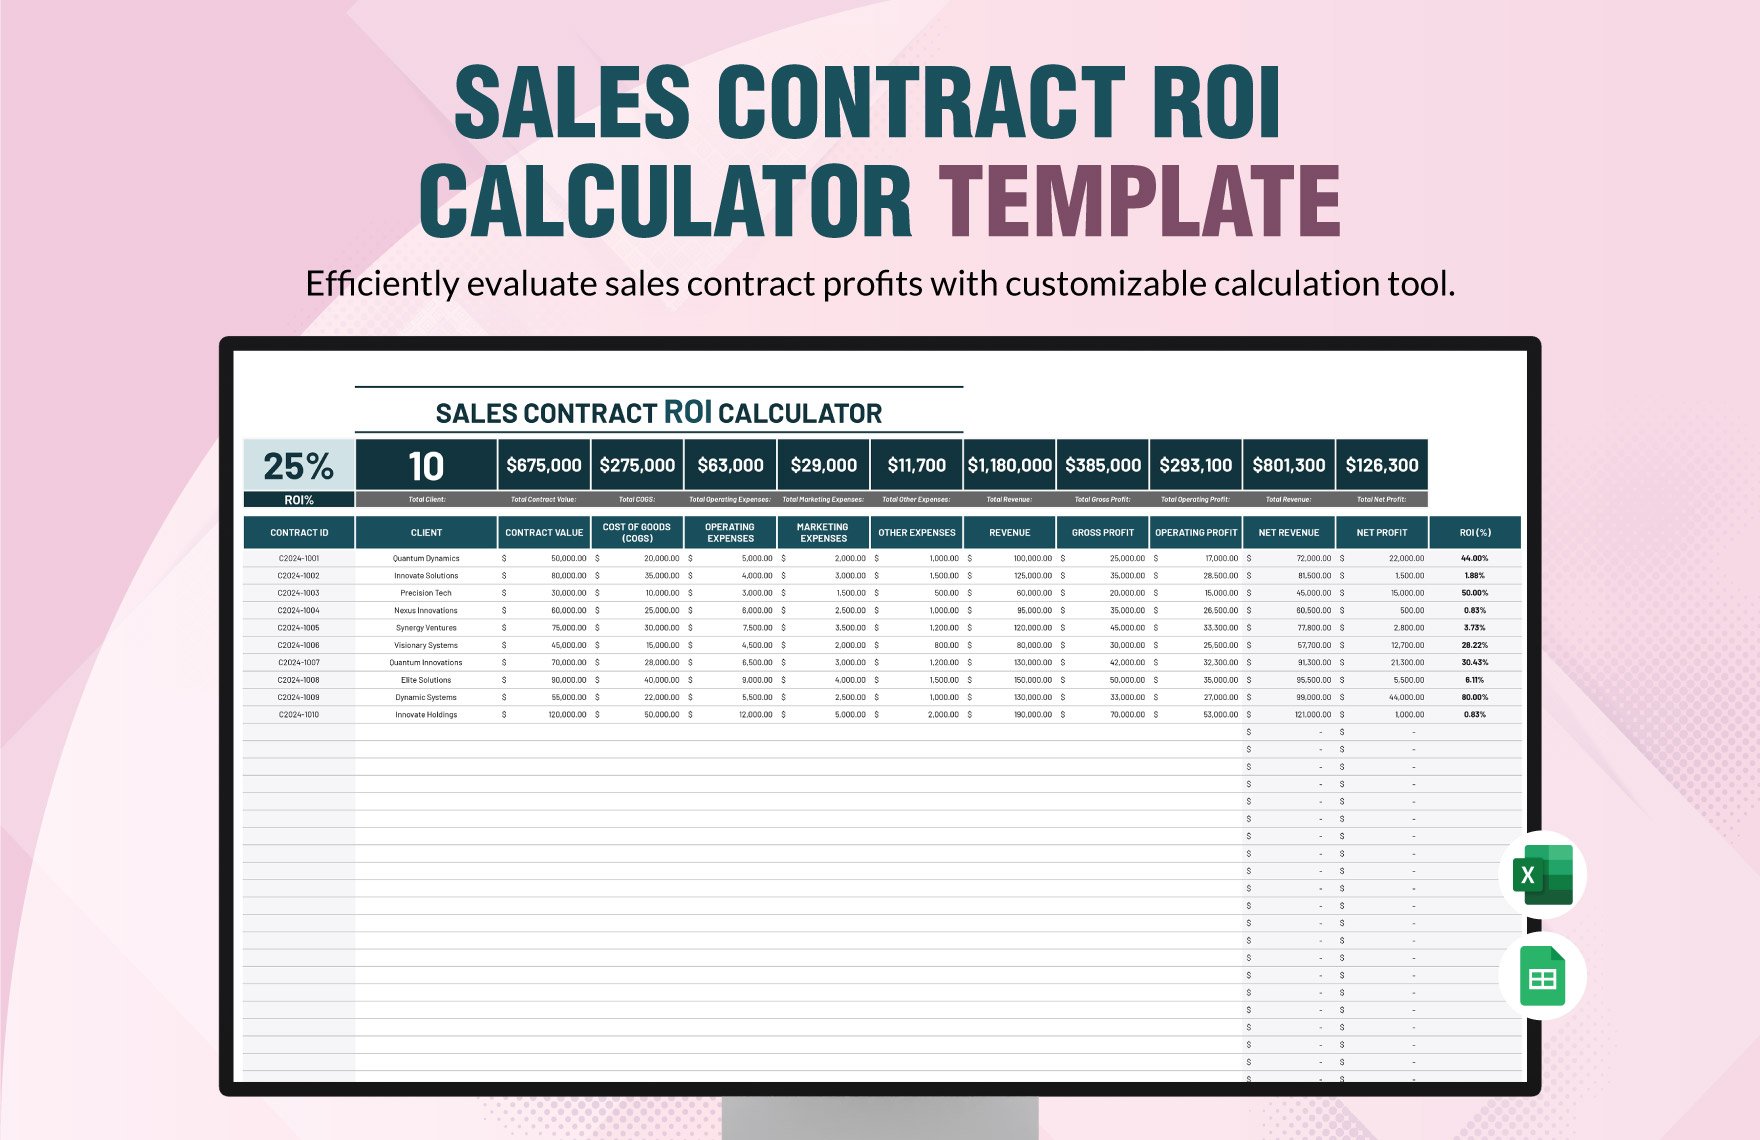 Sales Contract ROI Calculator Template in Excel, Google Sheets